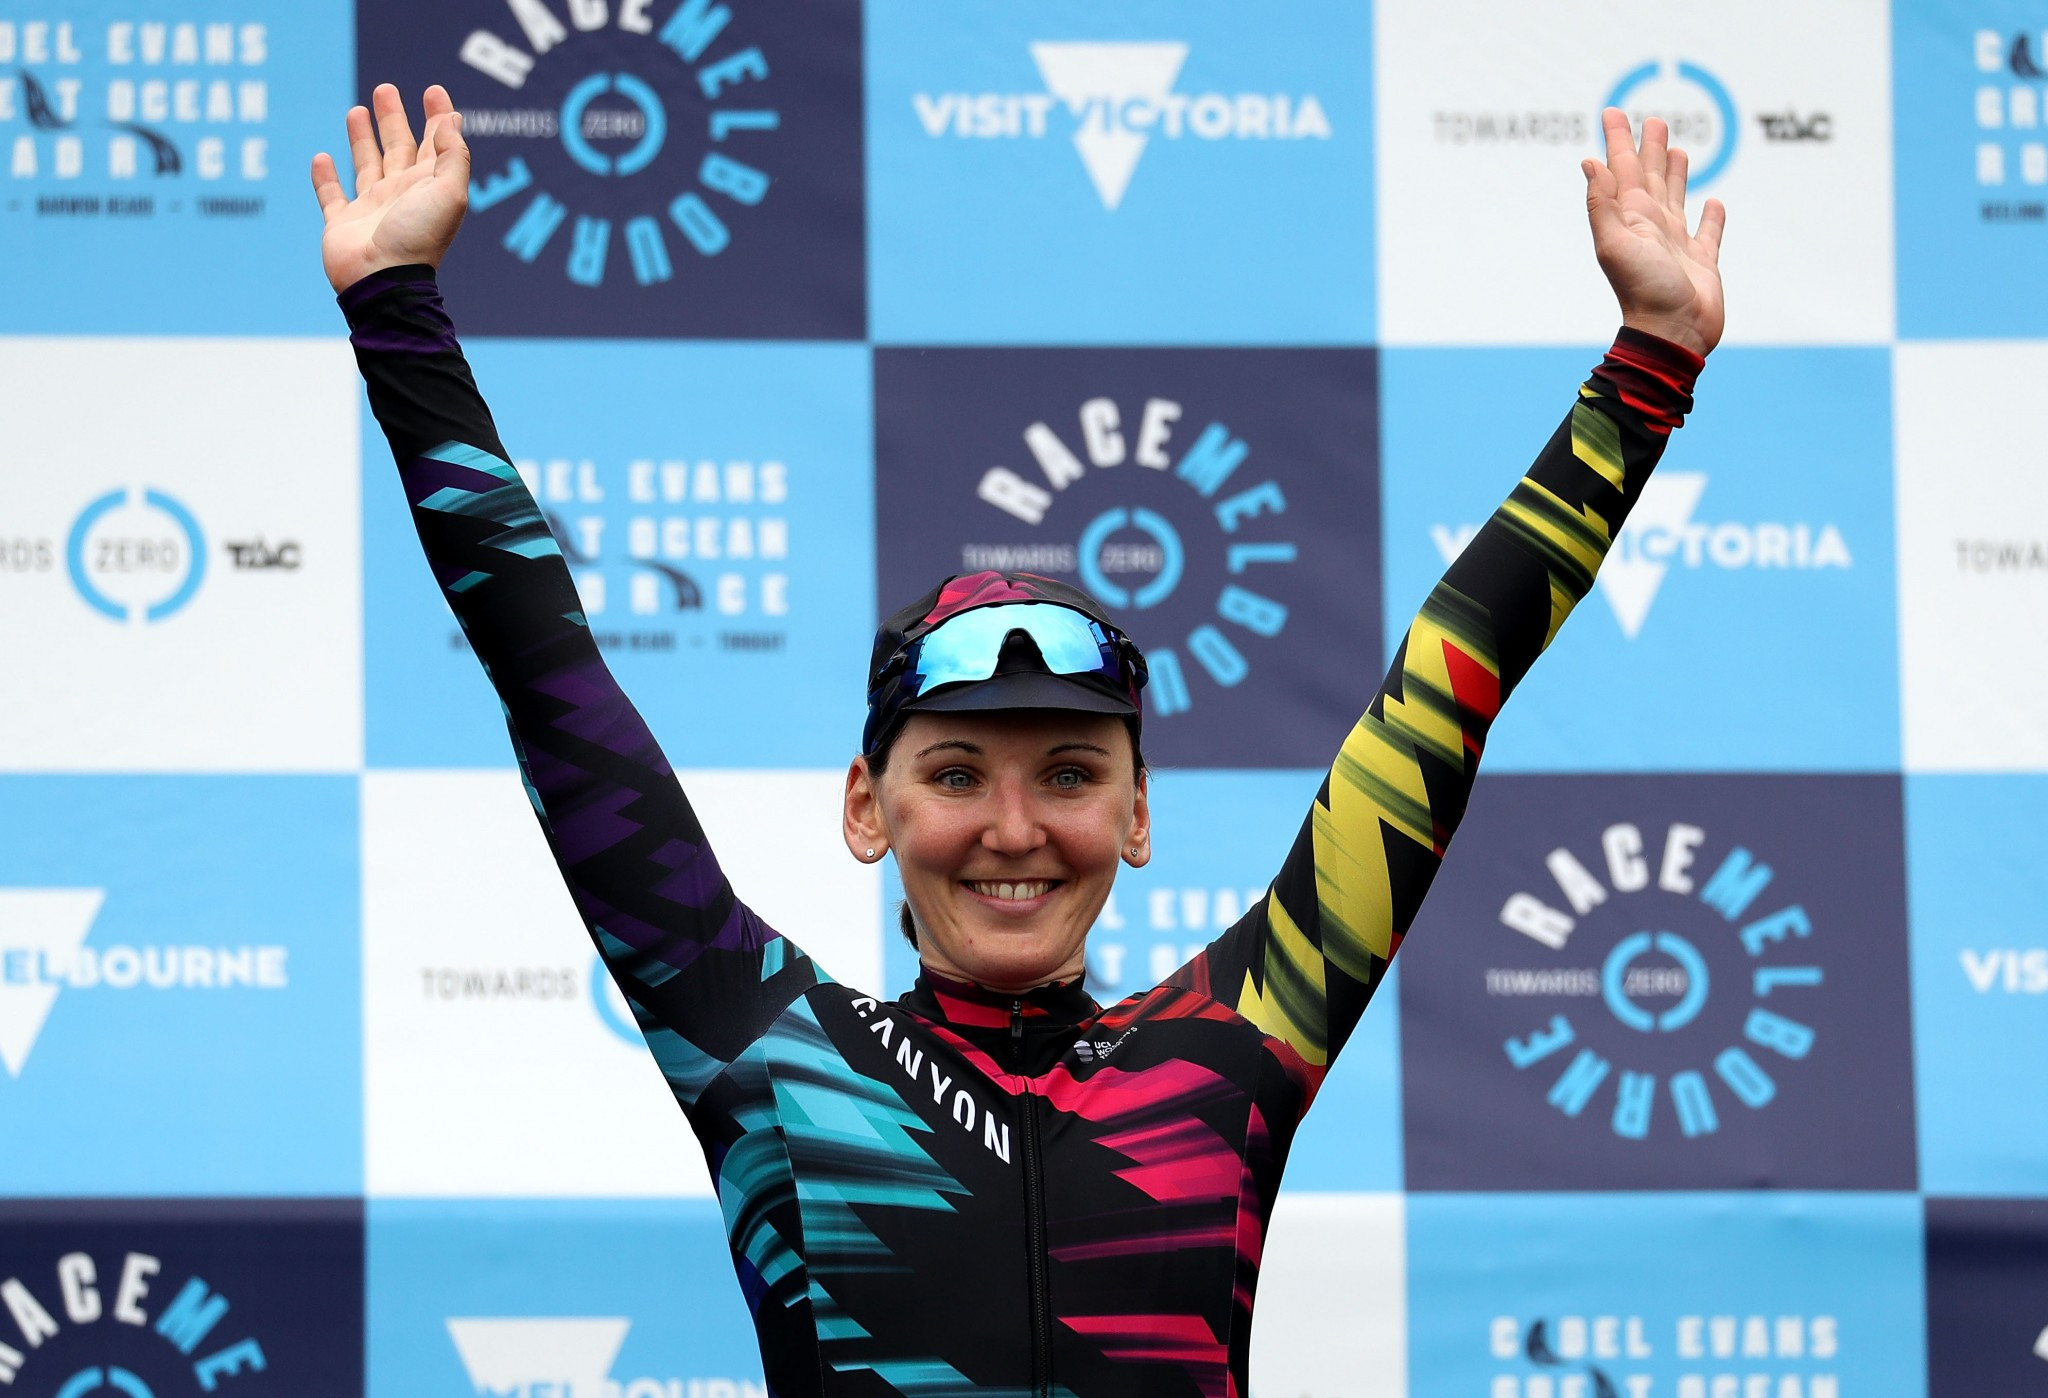 Brennauer wins stage four as Van Vleuten retains overall lead at Ladies Tour of Holland